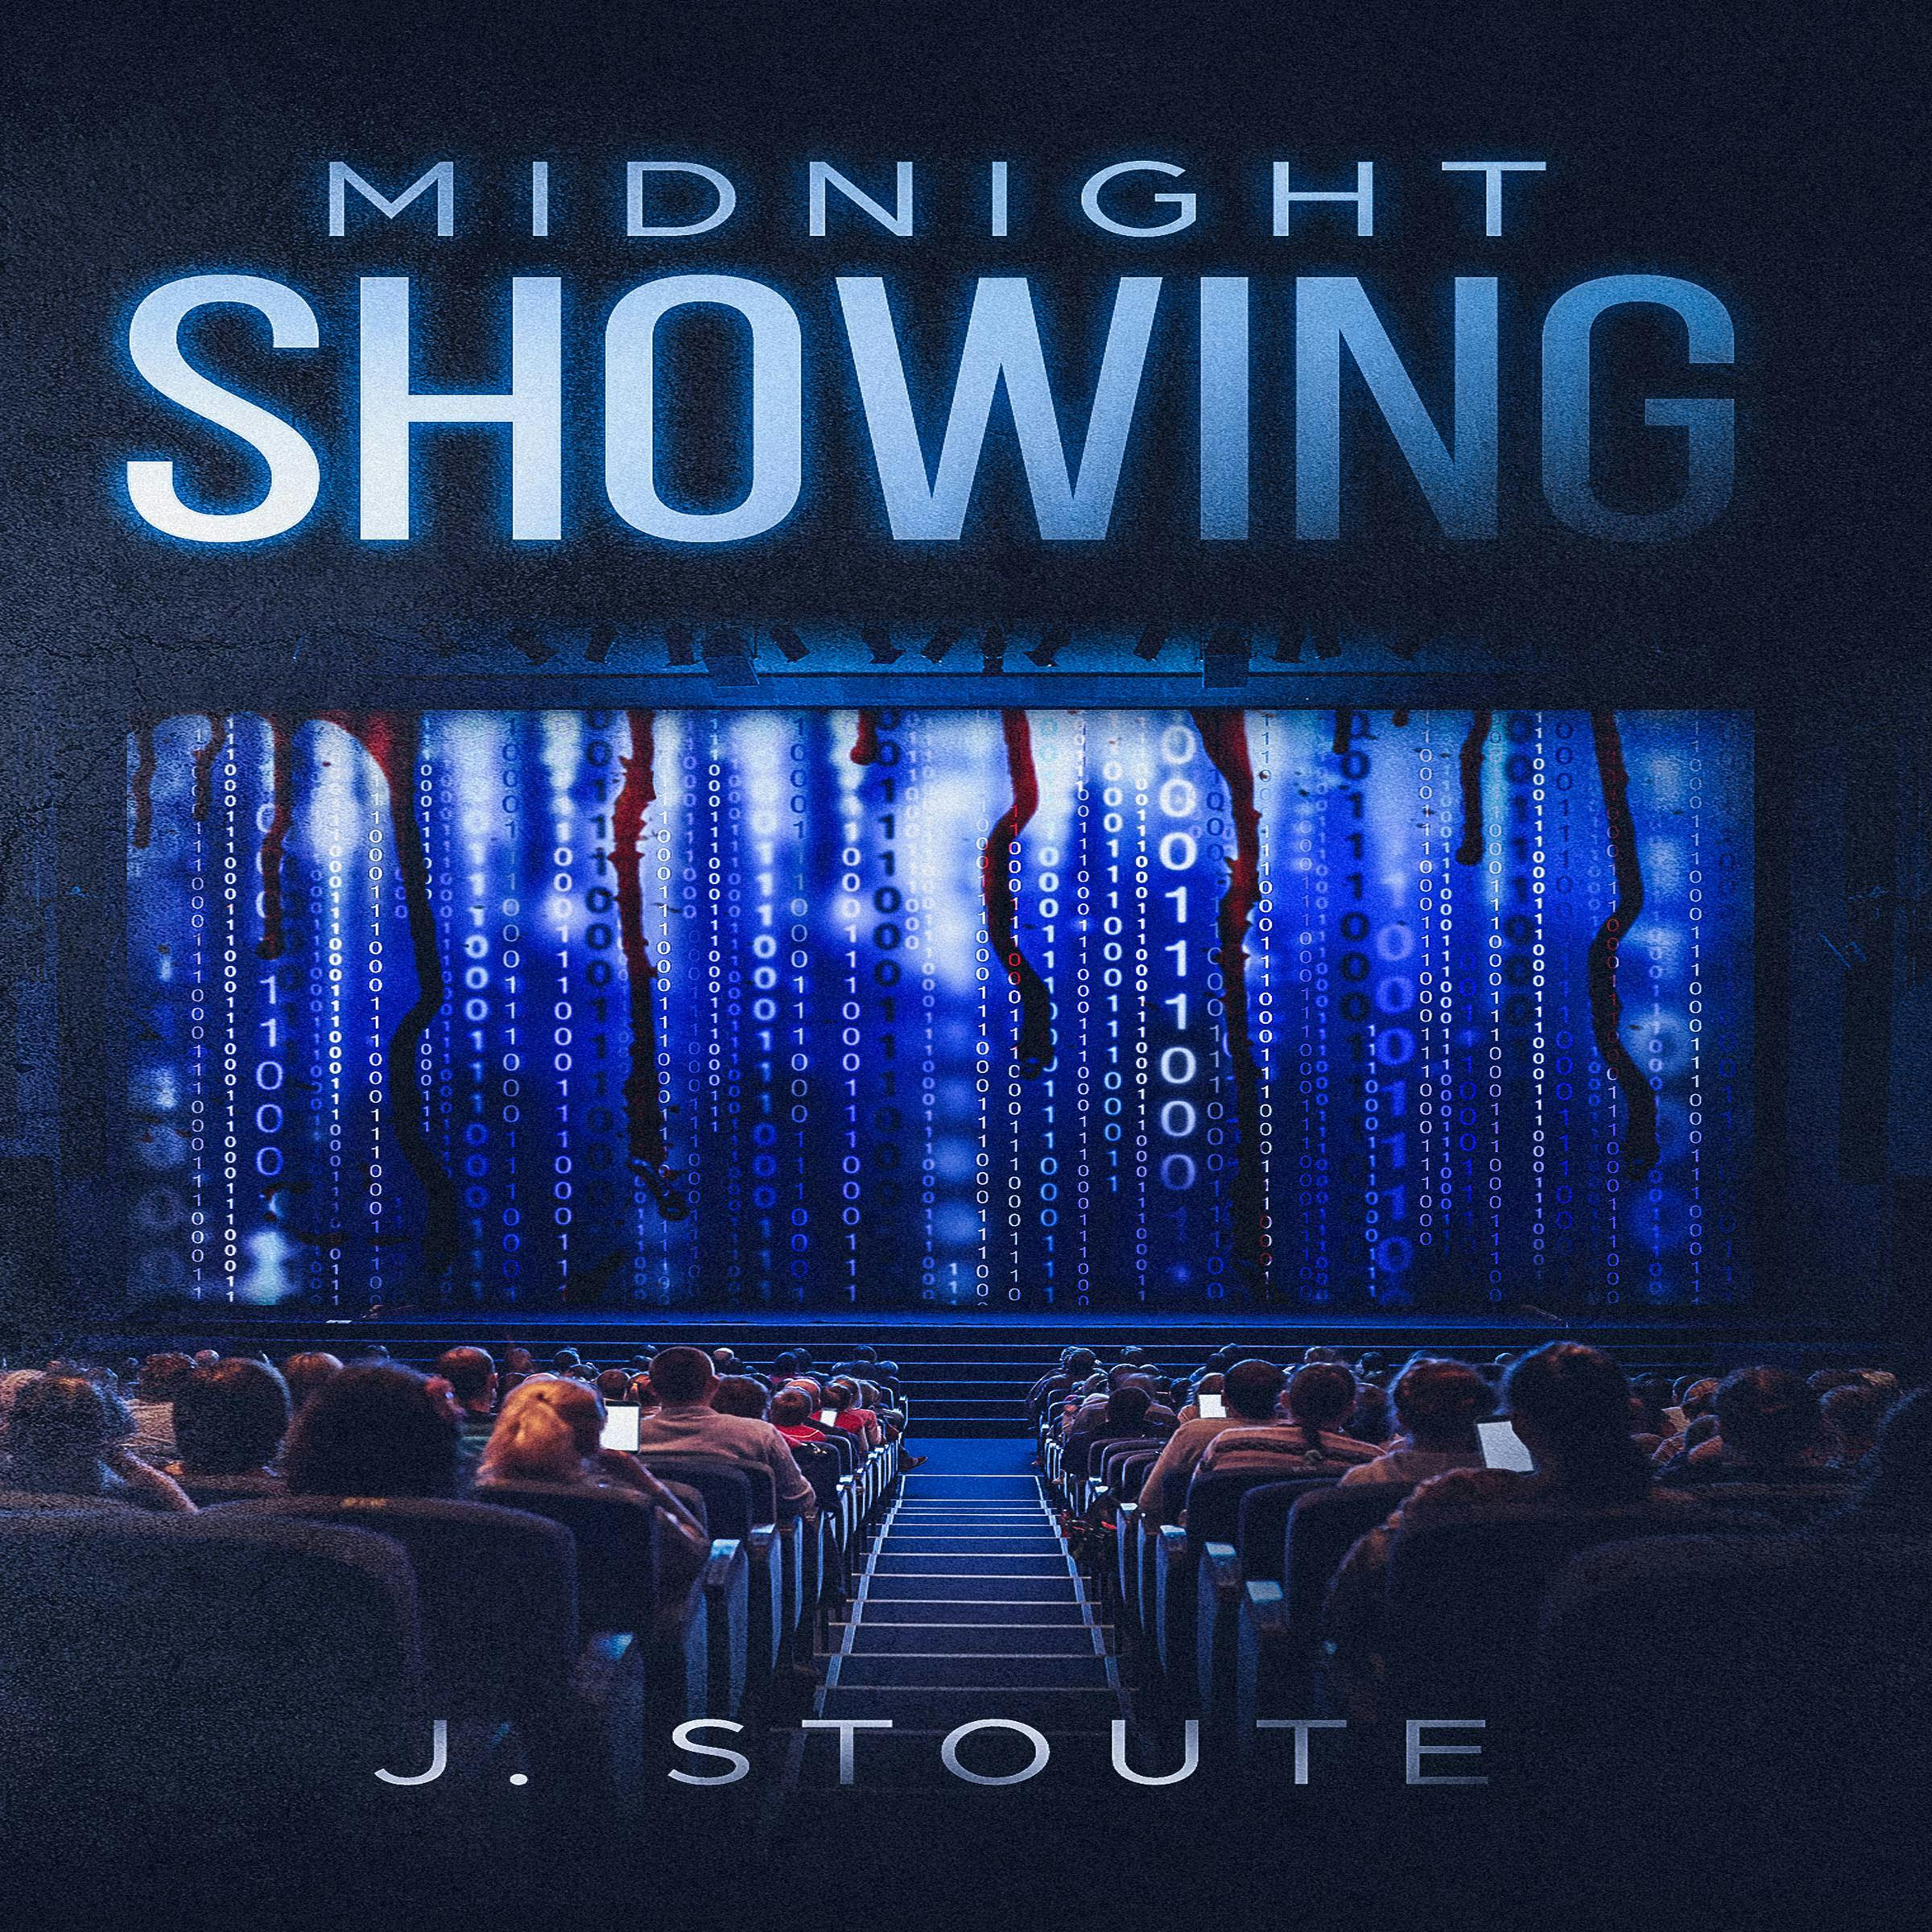 Midnight Showing - J. Stoute